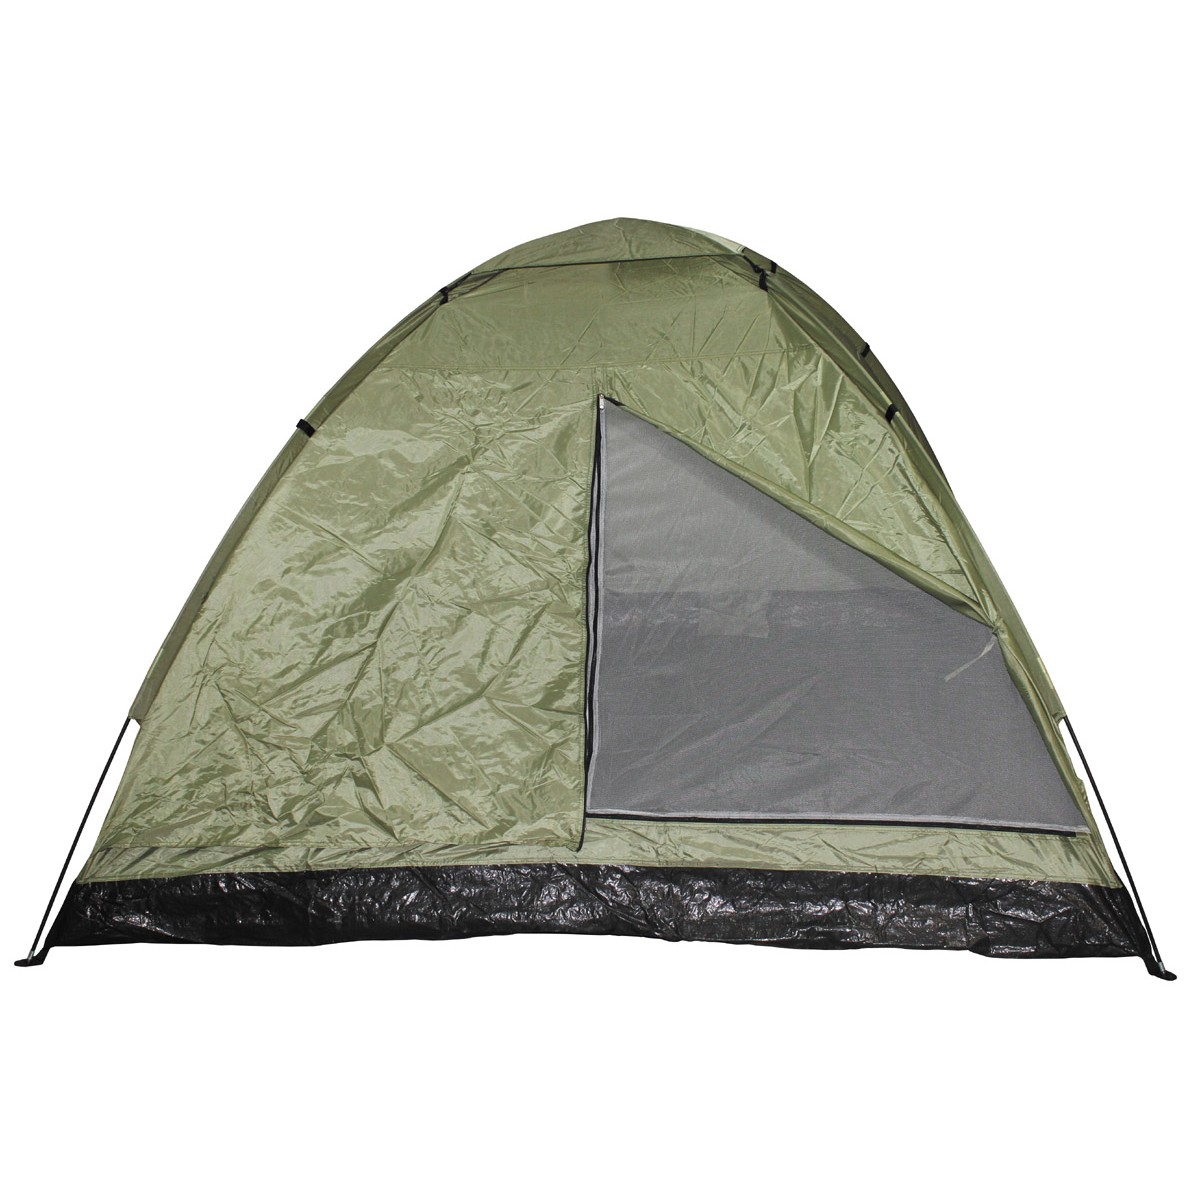 Military Tactical 3 Man Monodom Outdoor OD Green Shelter Tent